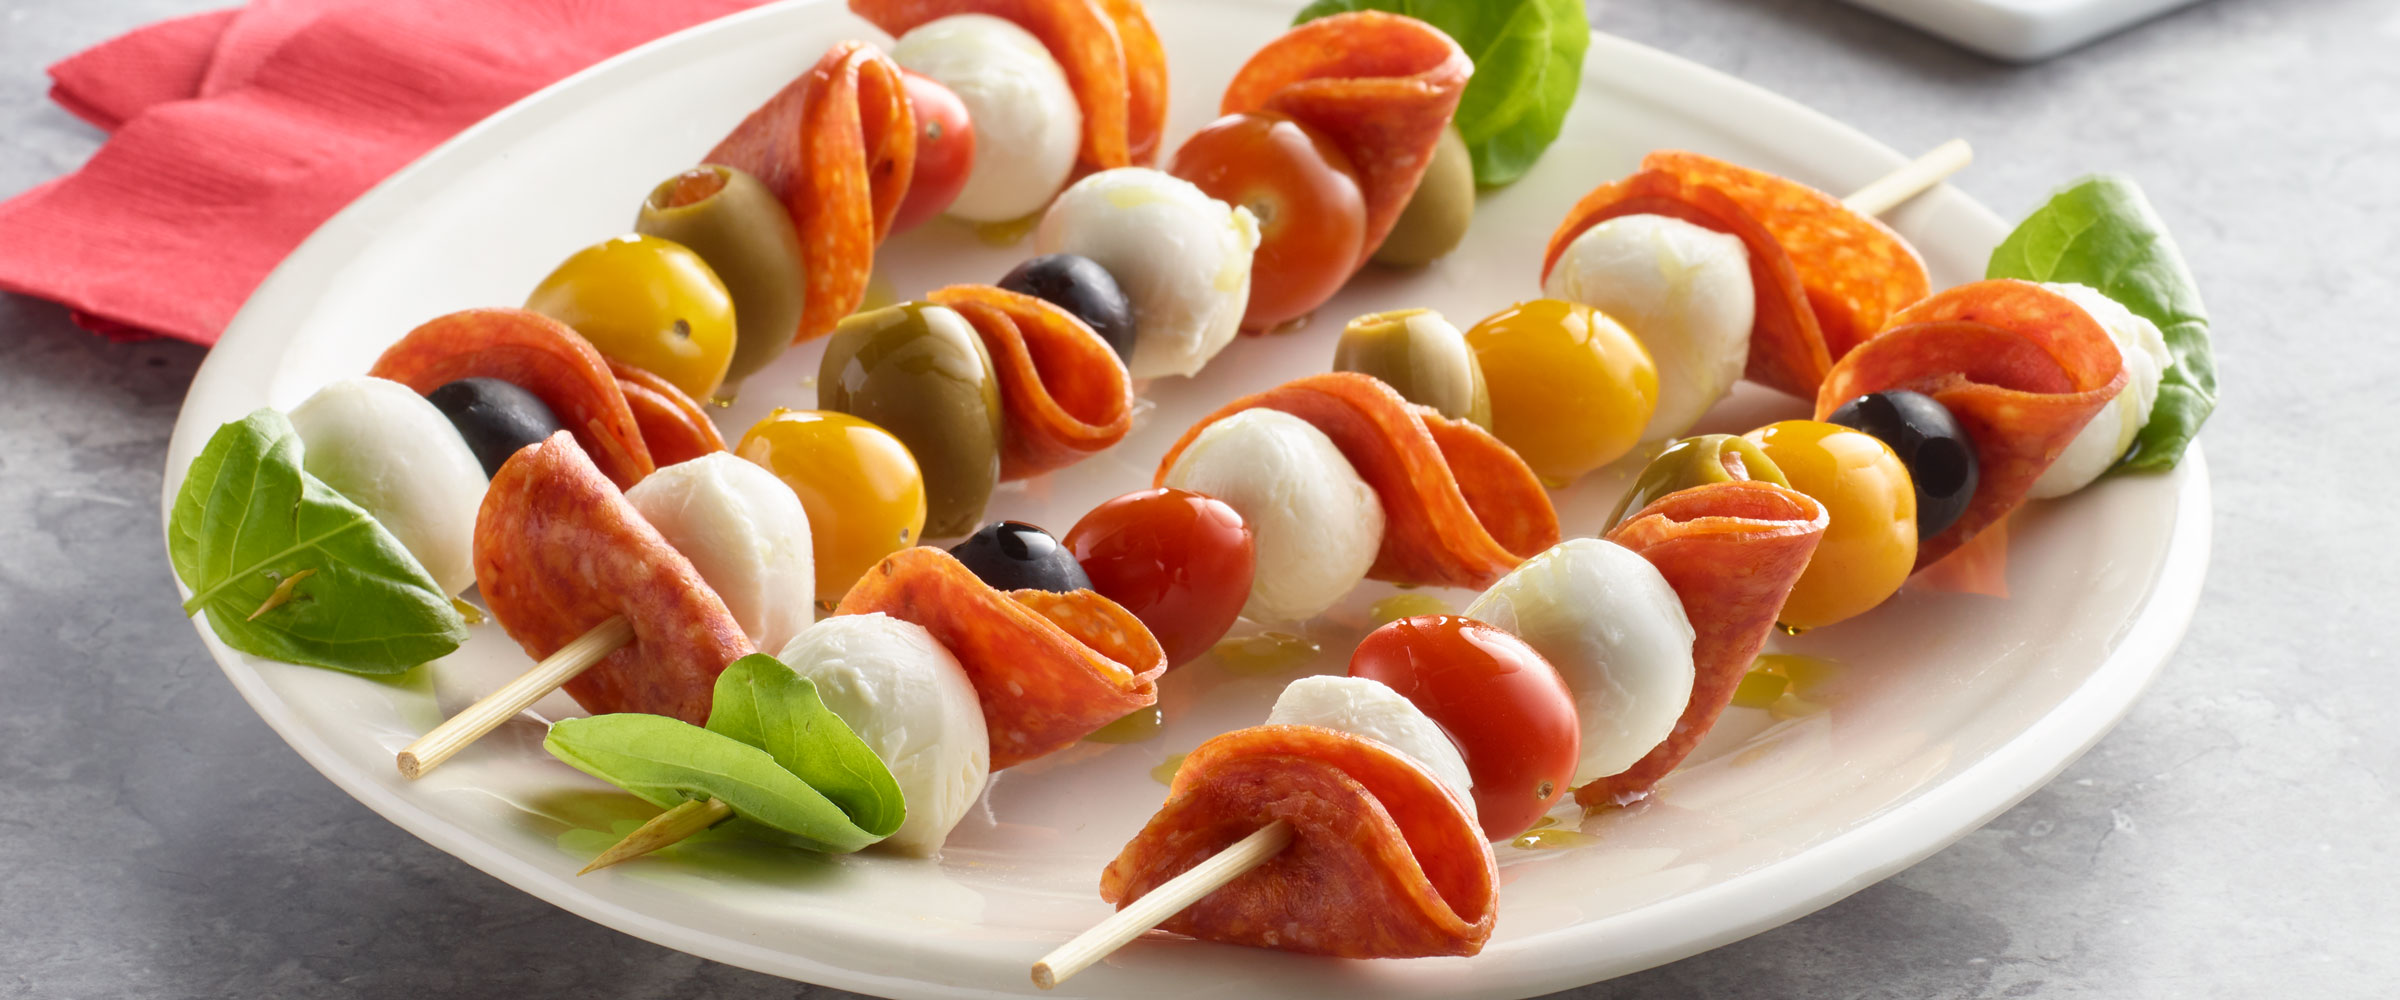 Pepperoni Antipasto Skewers with olives, tomatoes and mozzarella on white plate